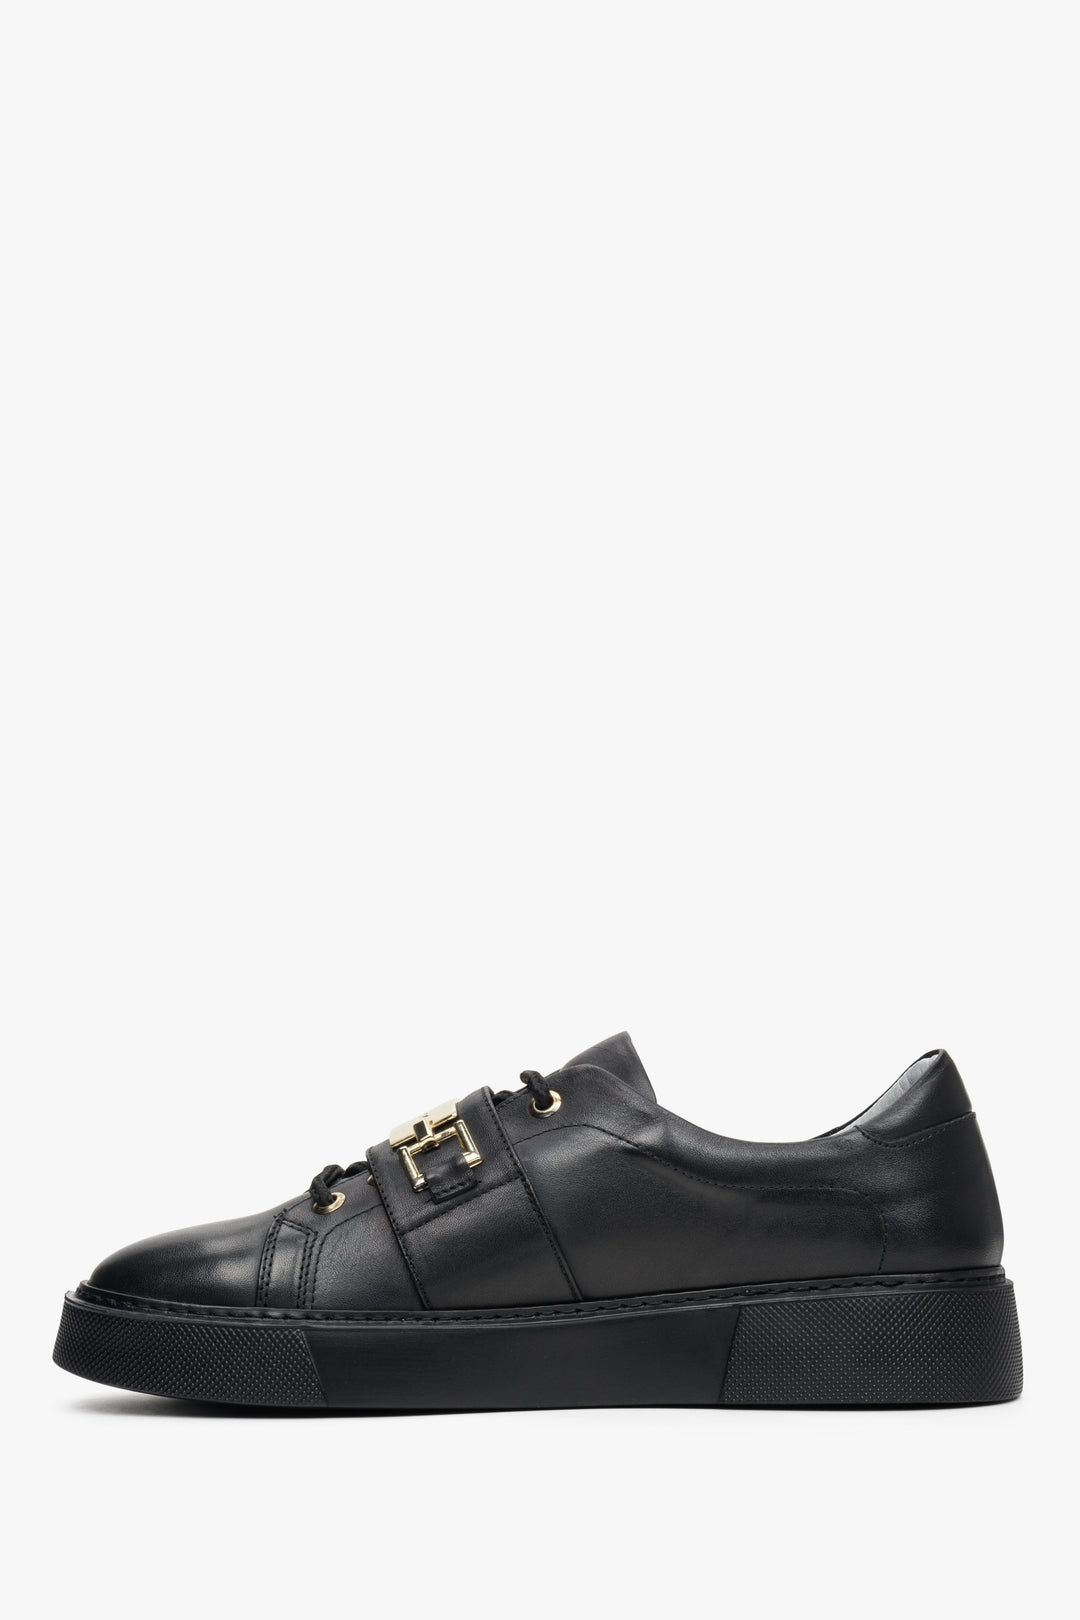 Women's black sneakers with a gold application by Estro - shoe profile.